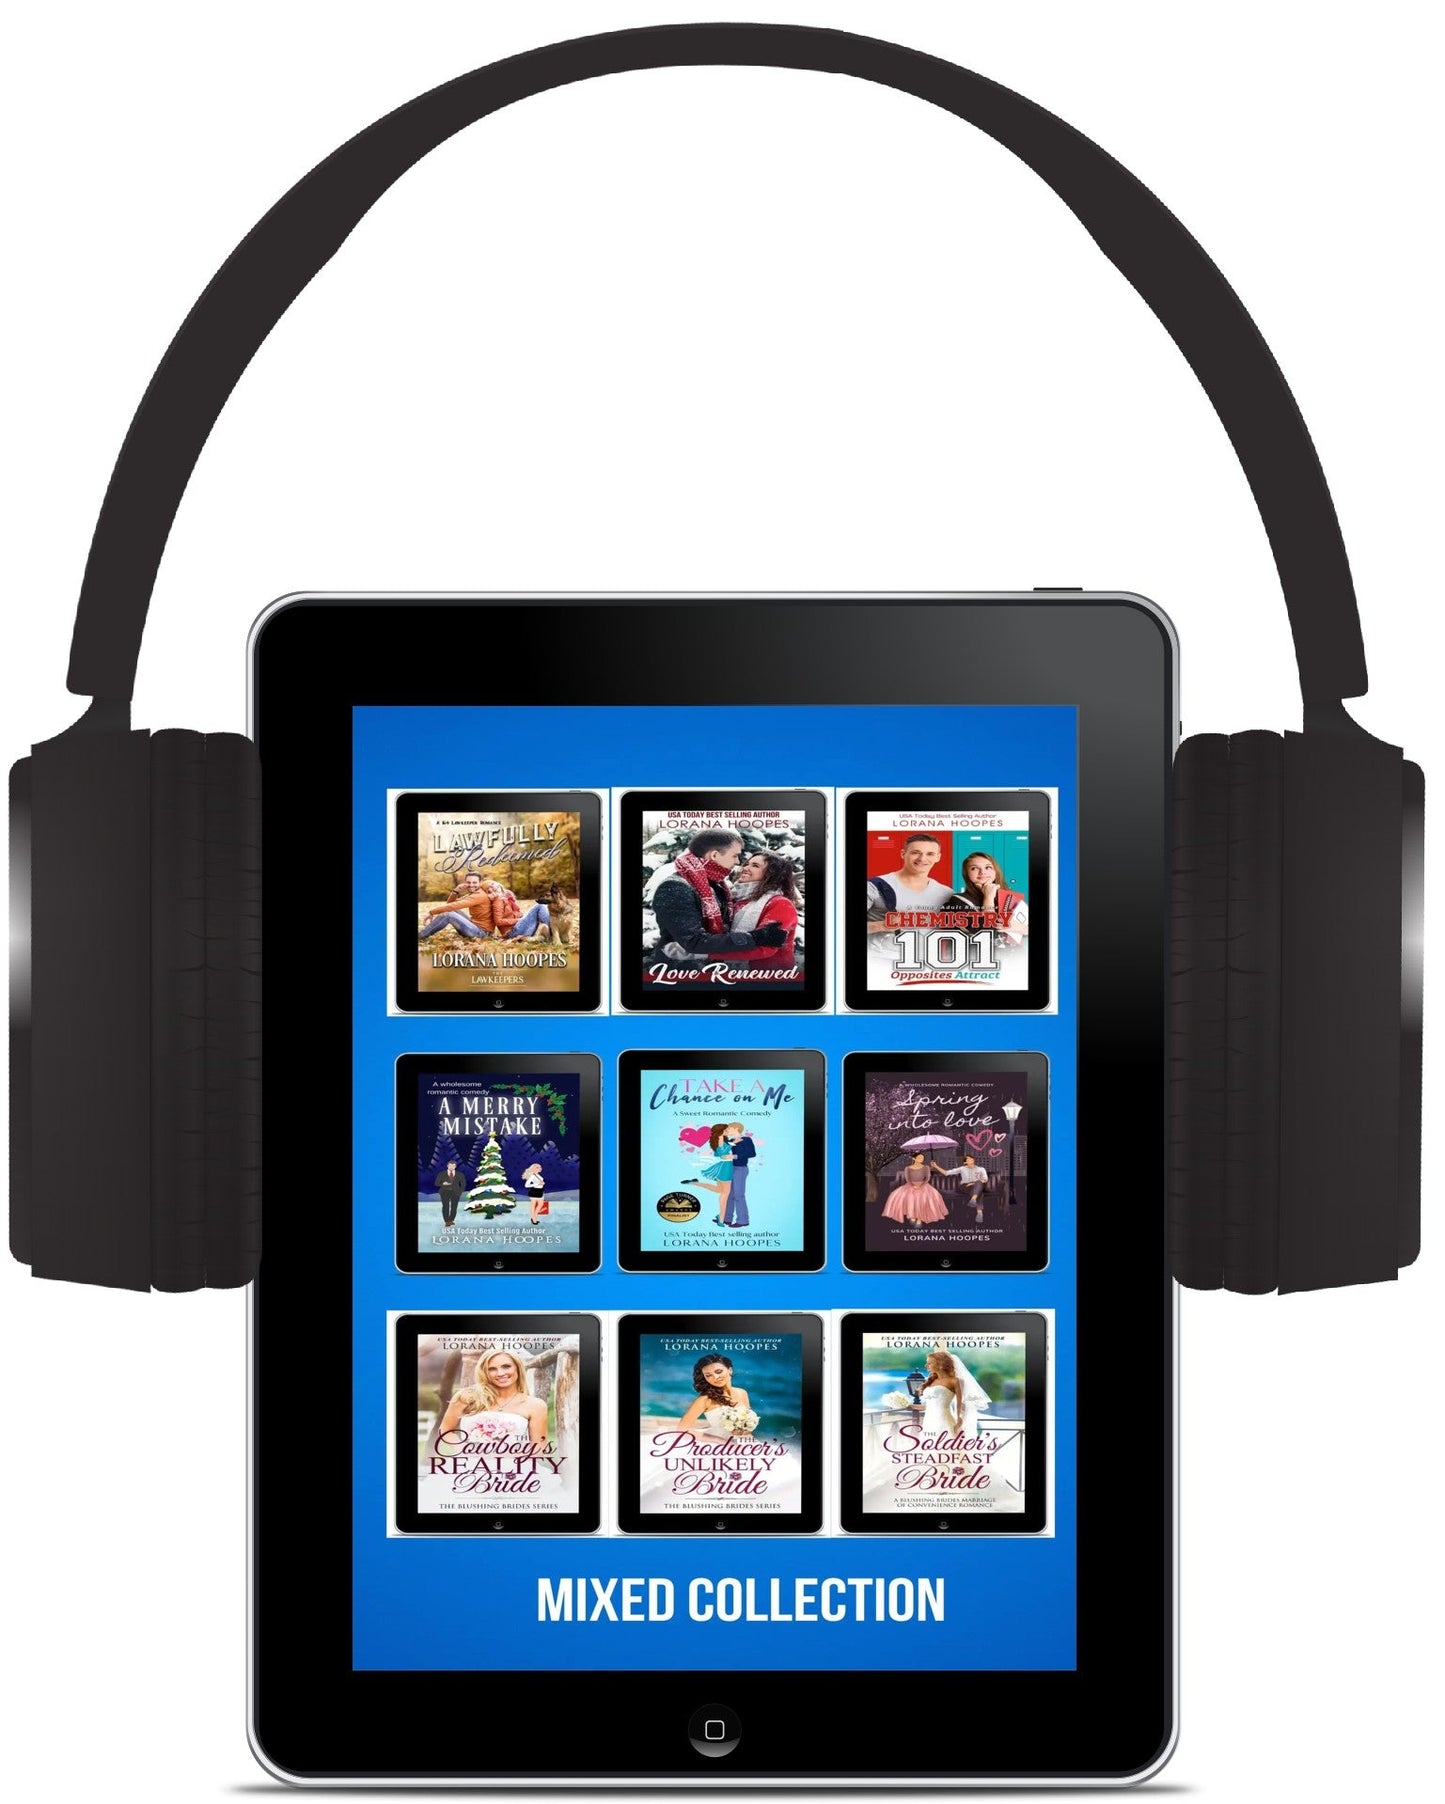 Mixed Collection Audiobooks